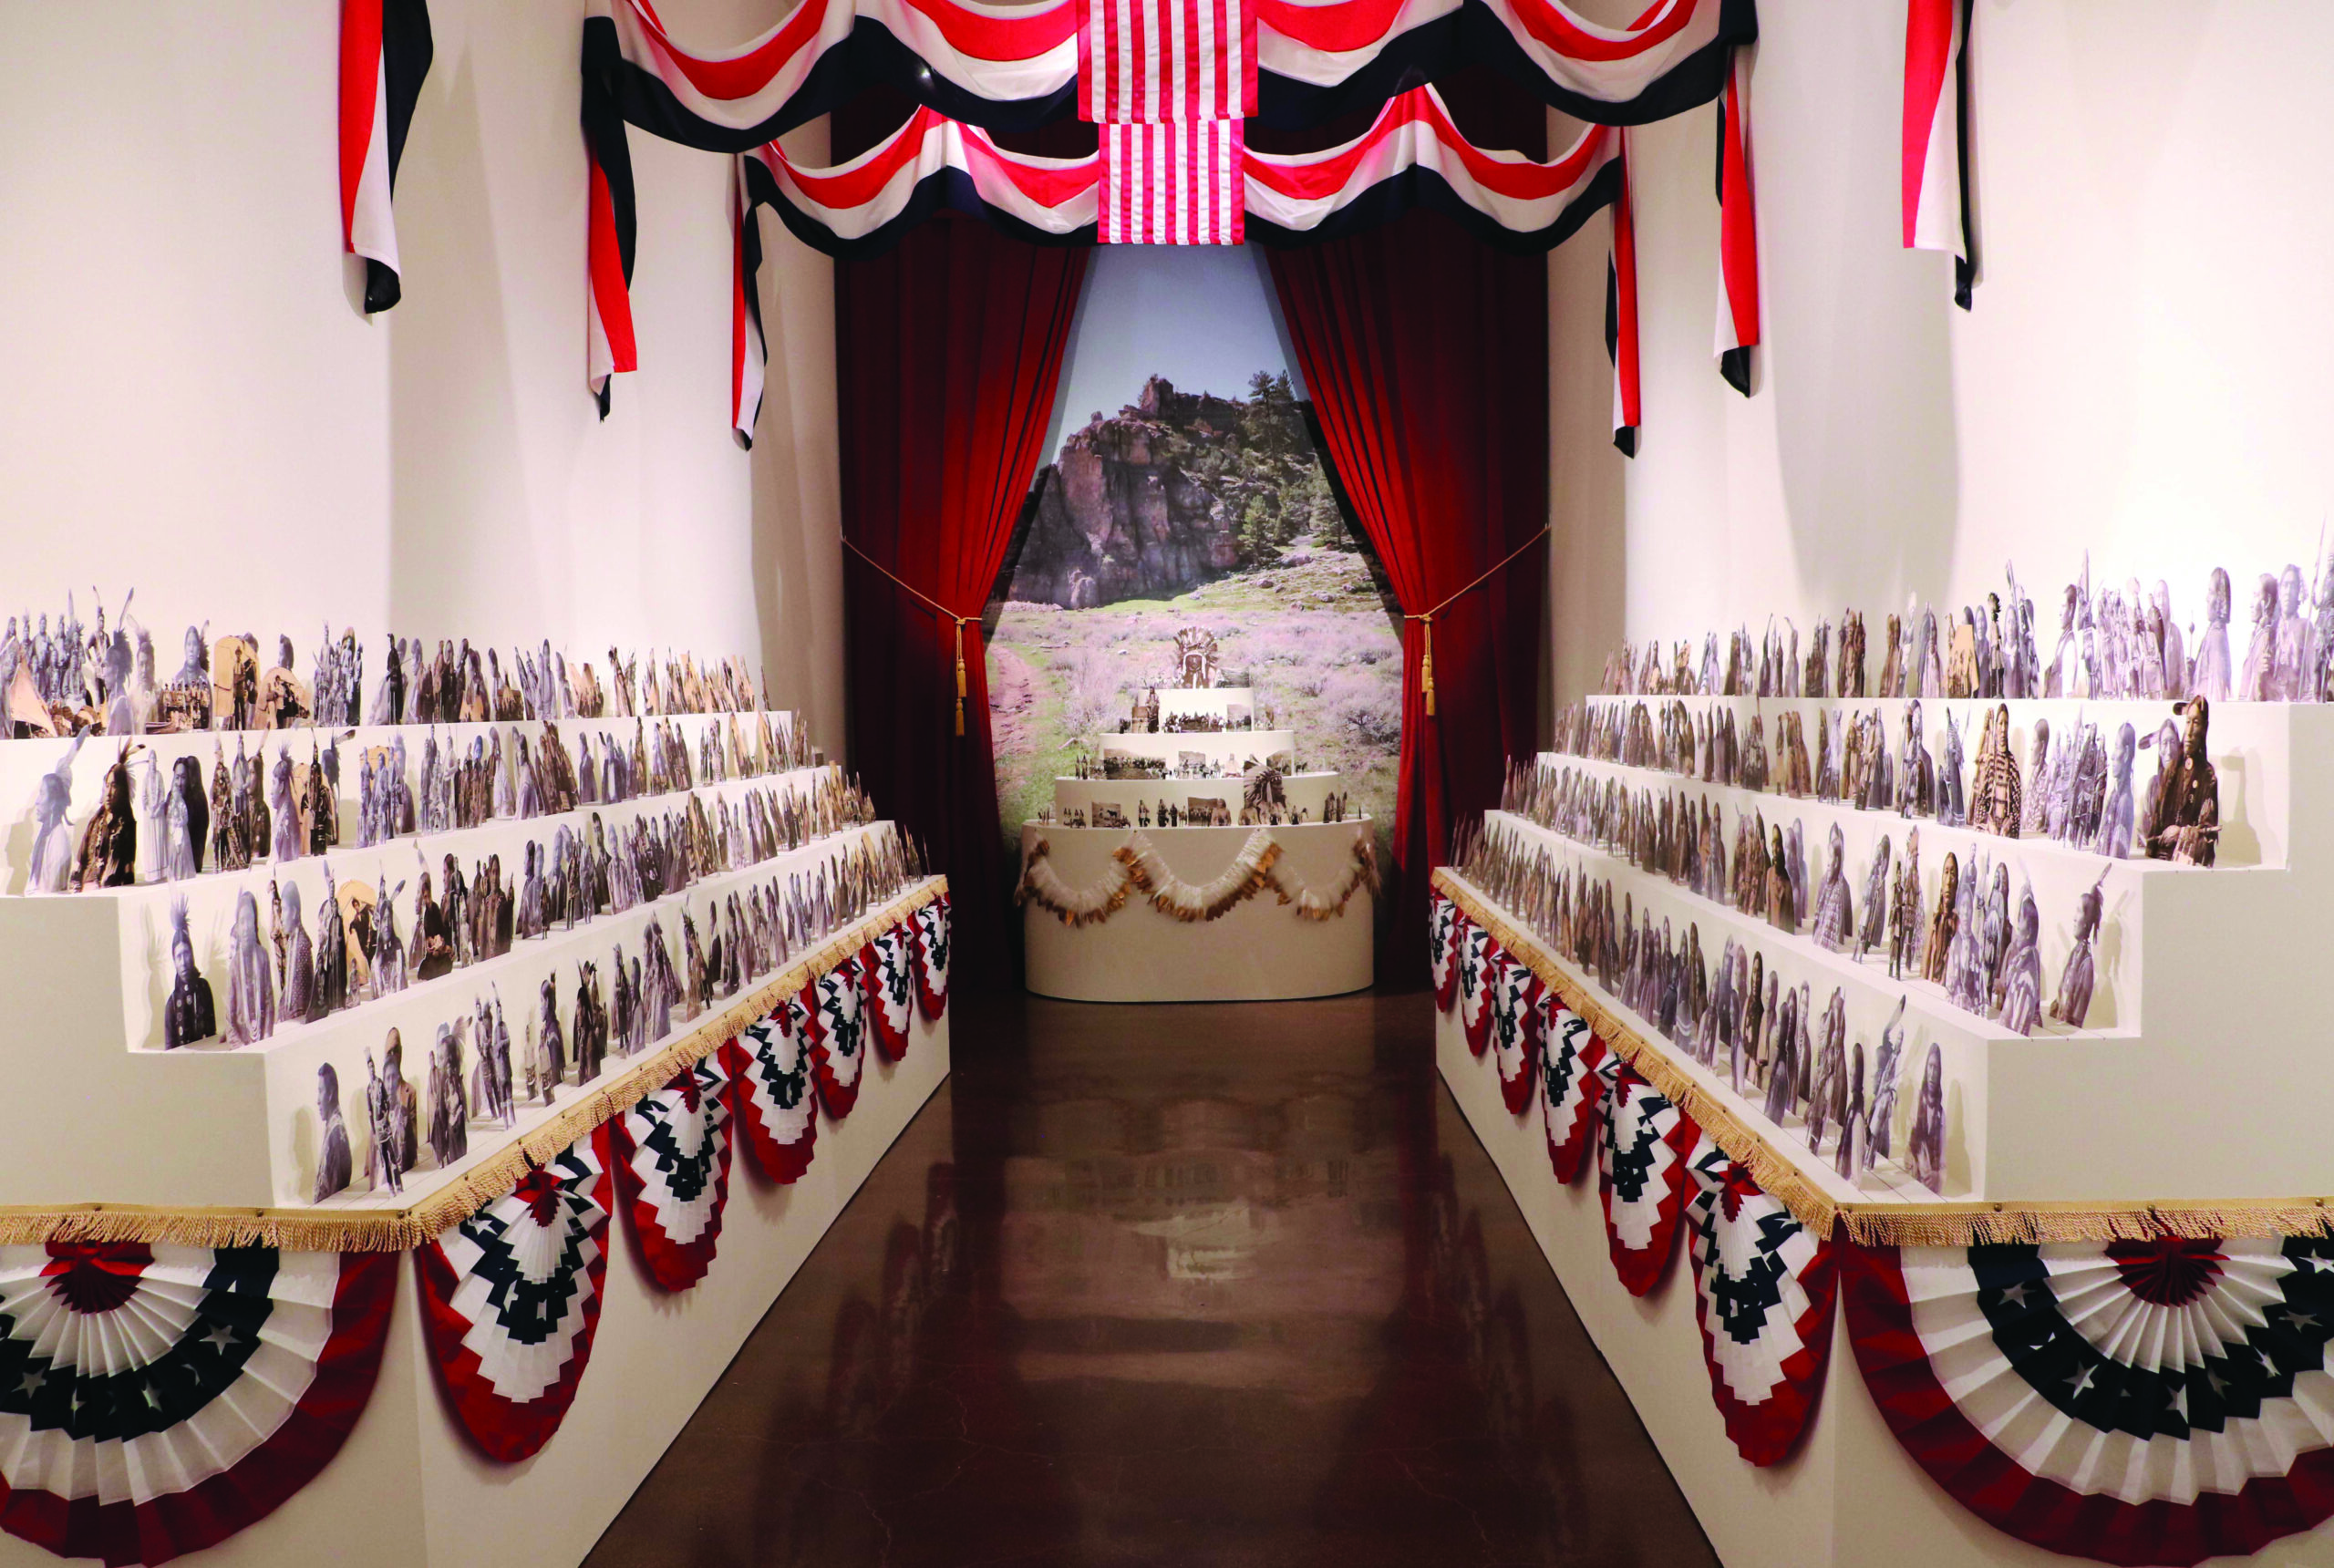 Part of Wendy Red Star's installation she is decolonizing the image with black and white images of Native Americans in rows above festive American banners of red, white and blue